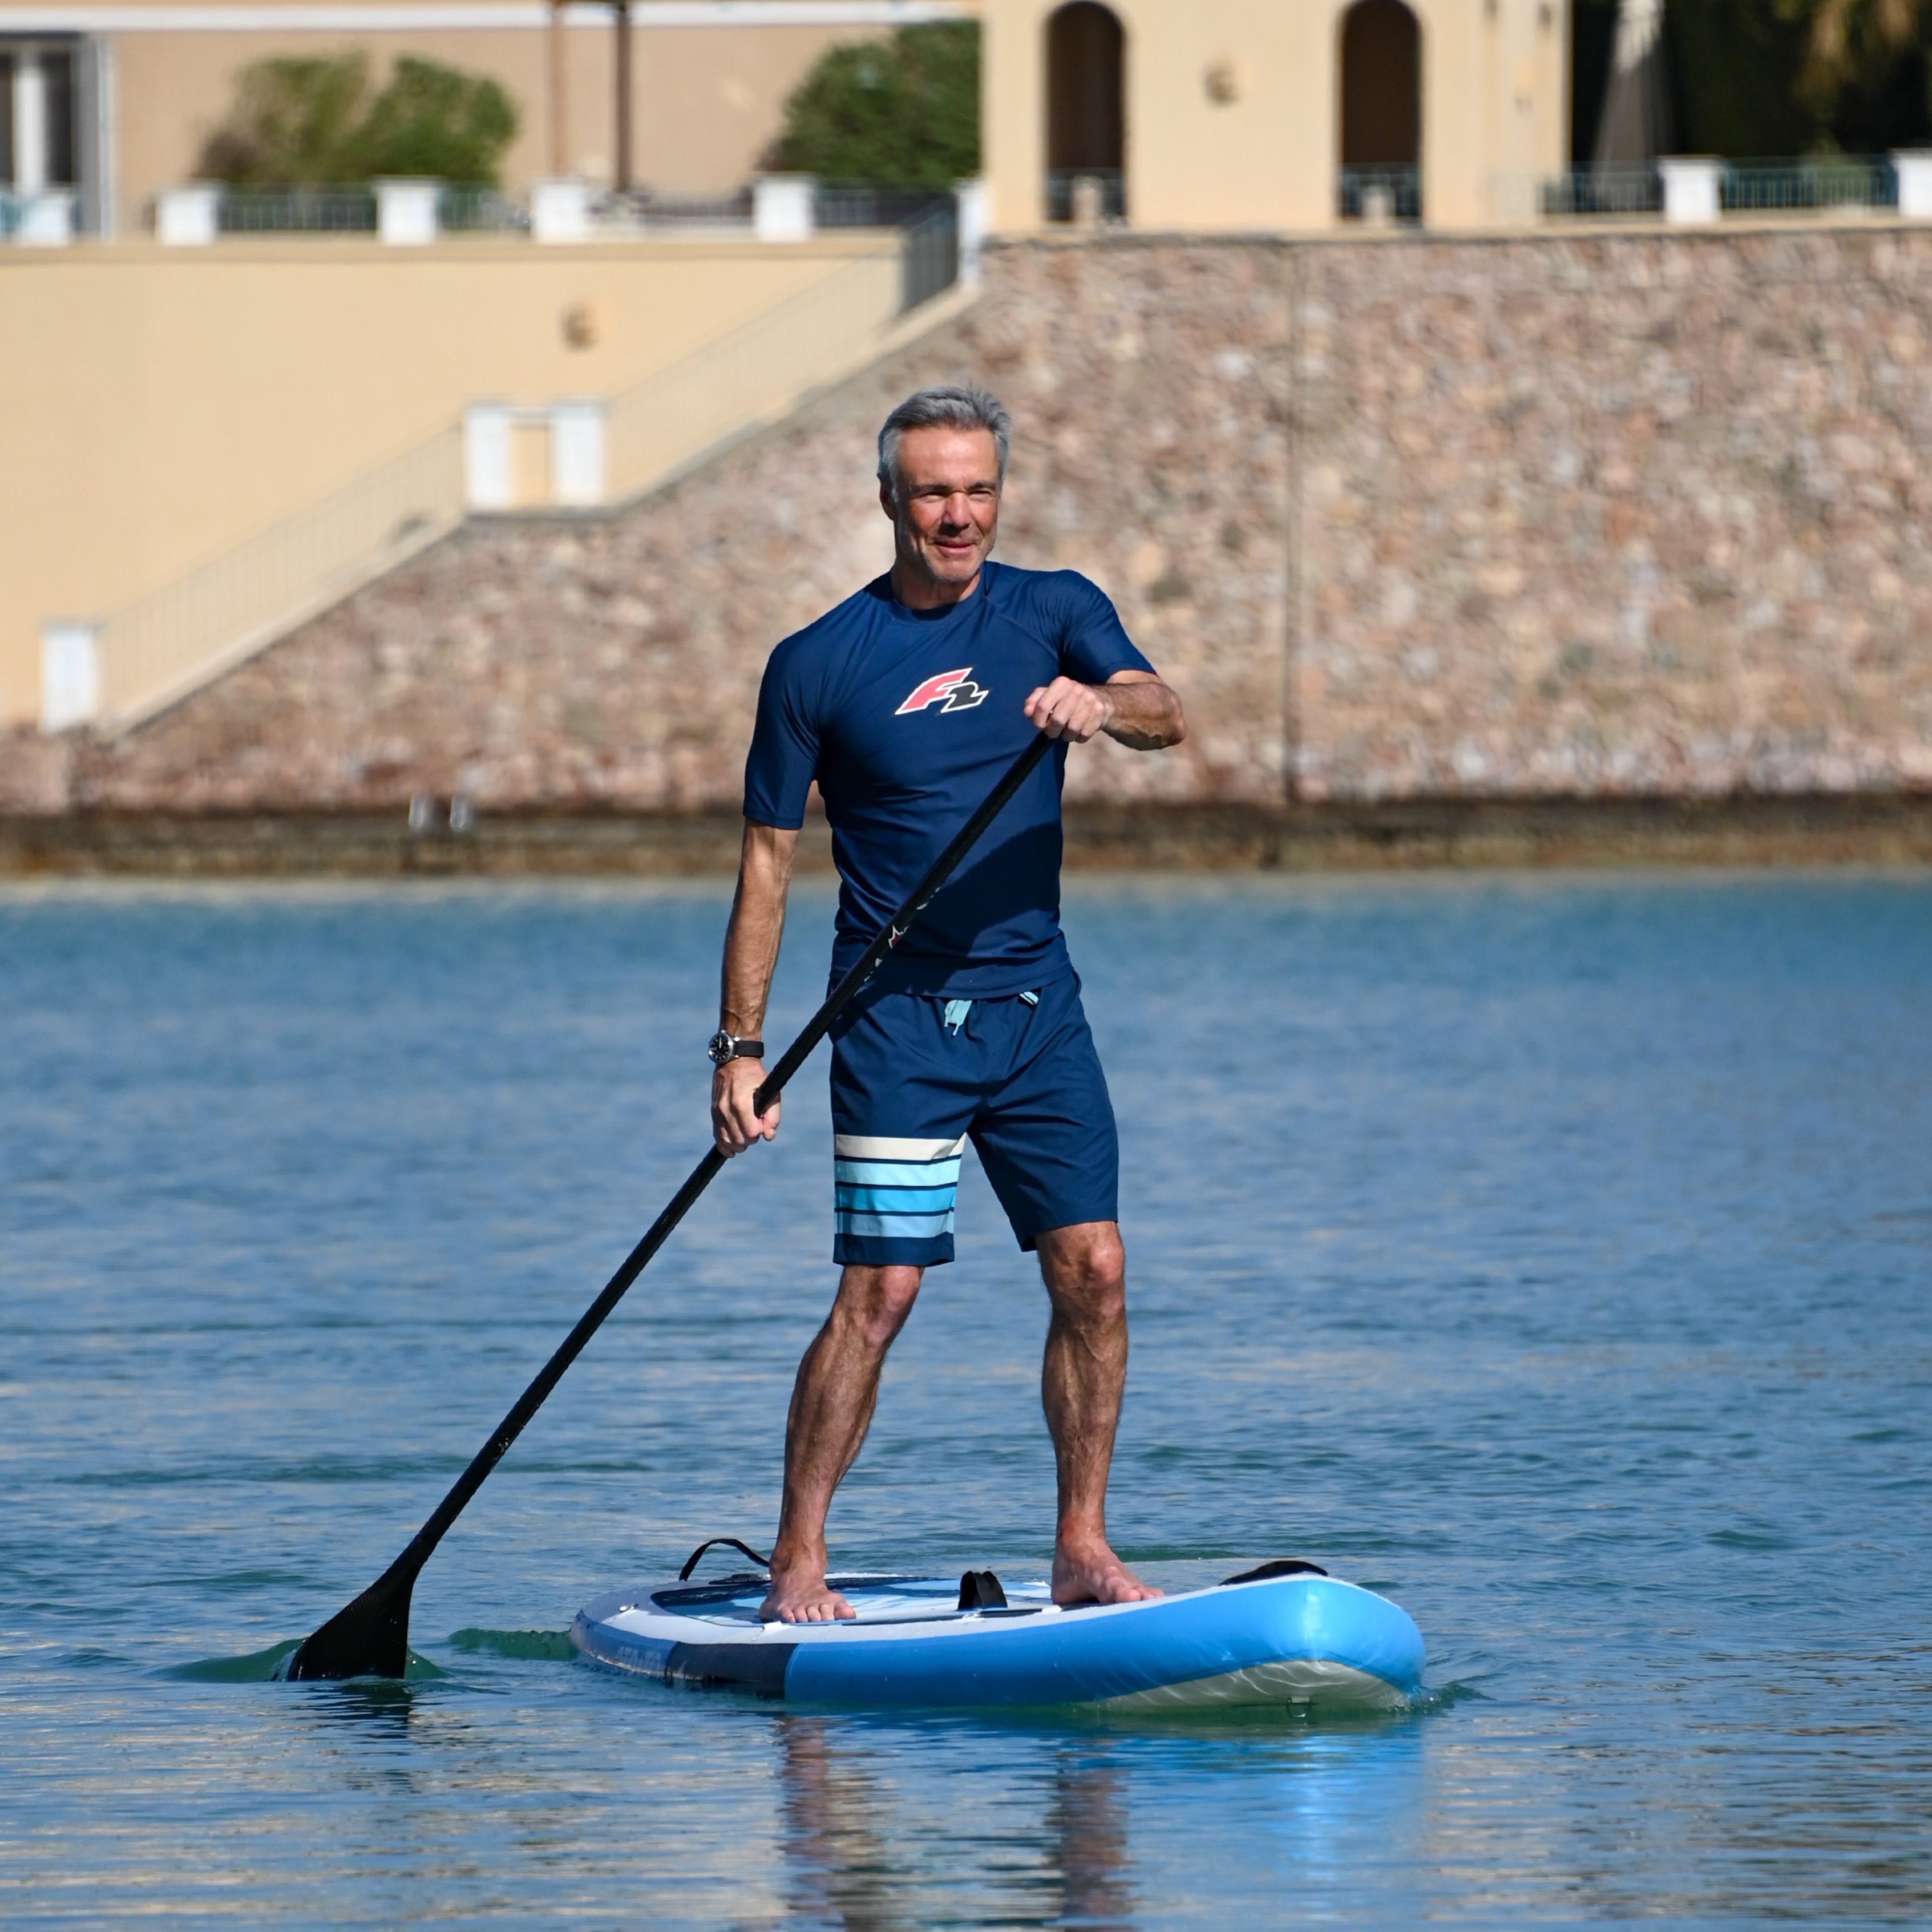 Water ohne SUP-Board F2 Open Paddel